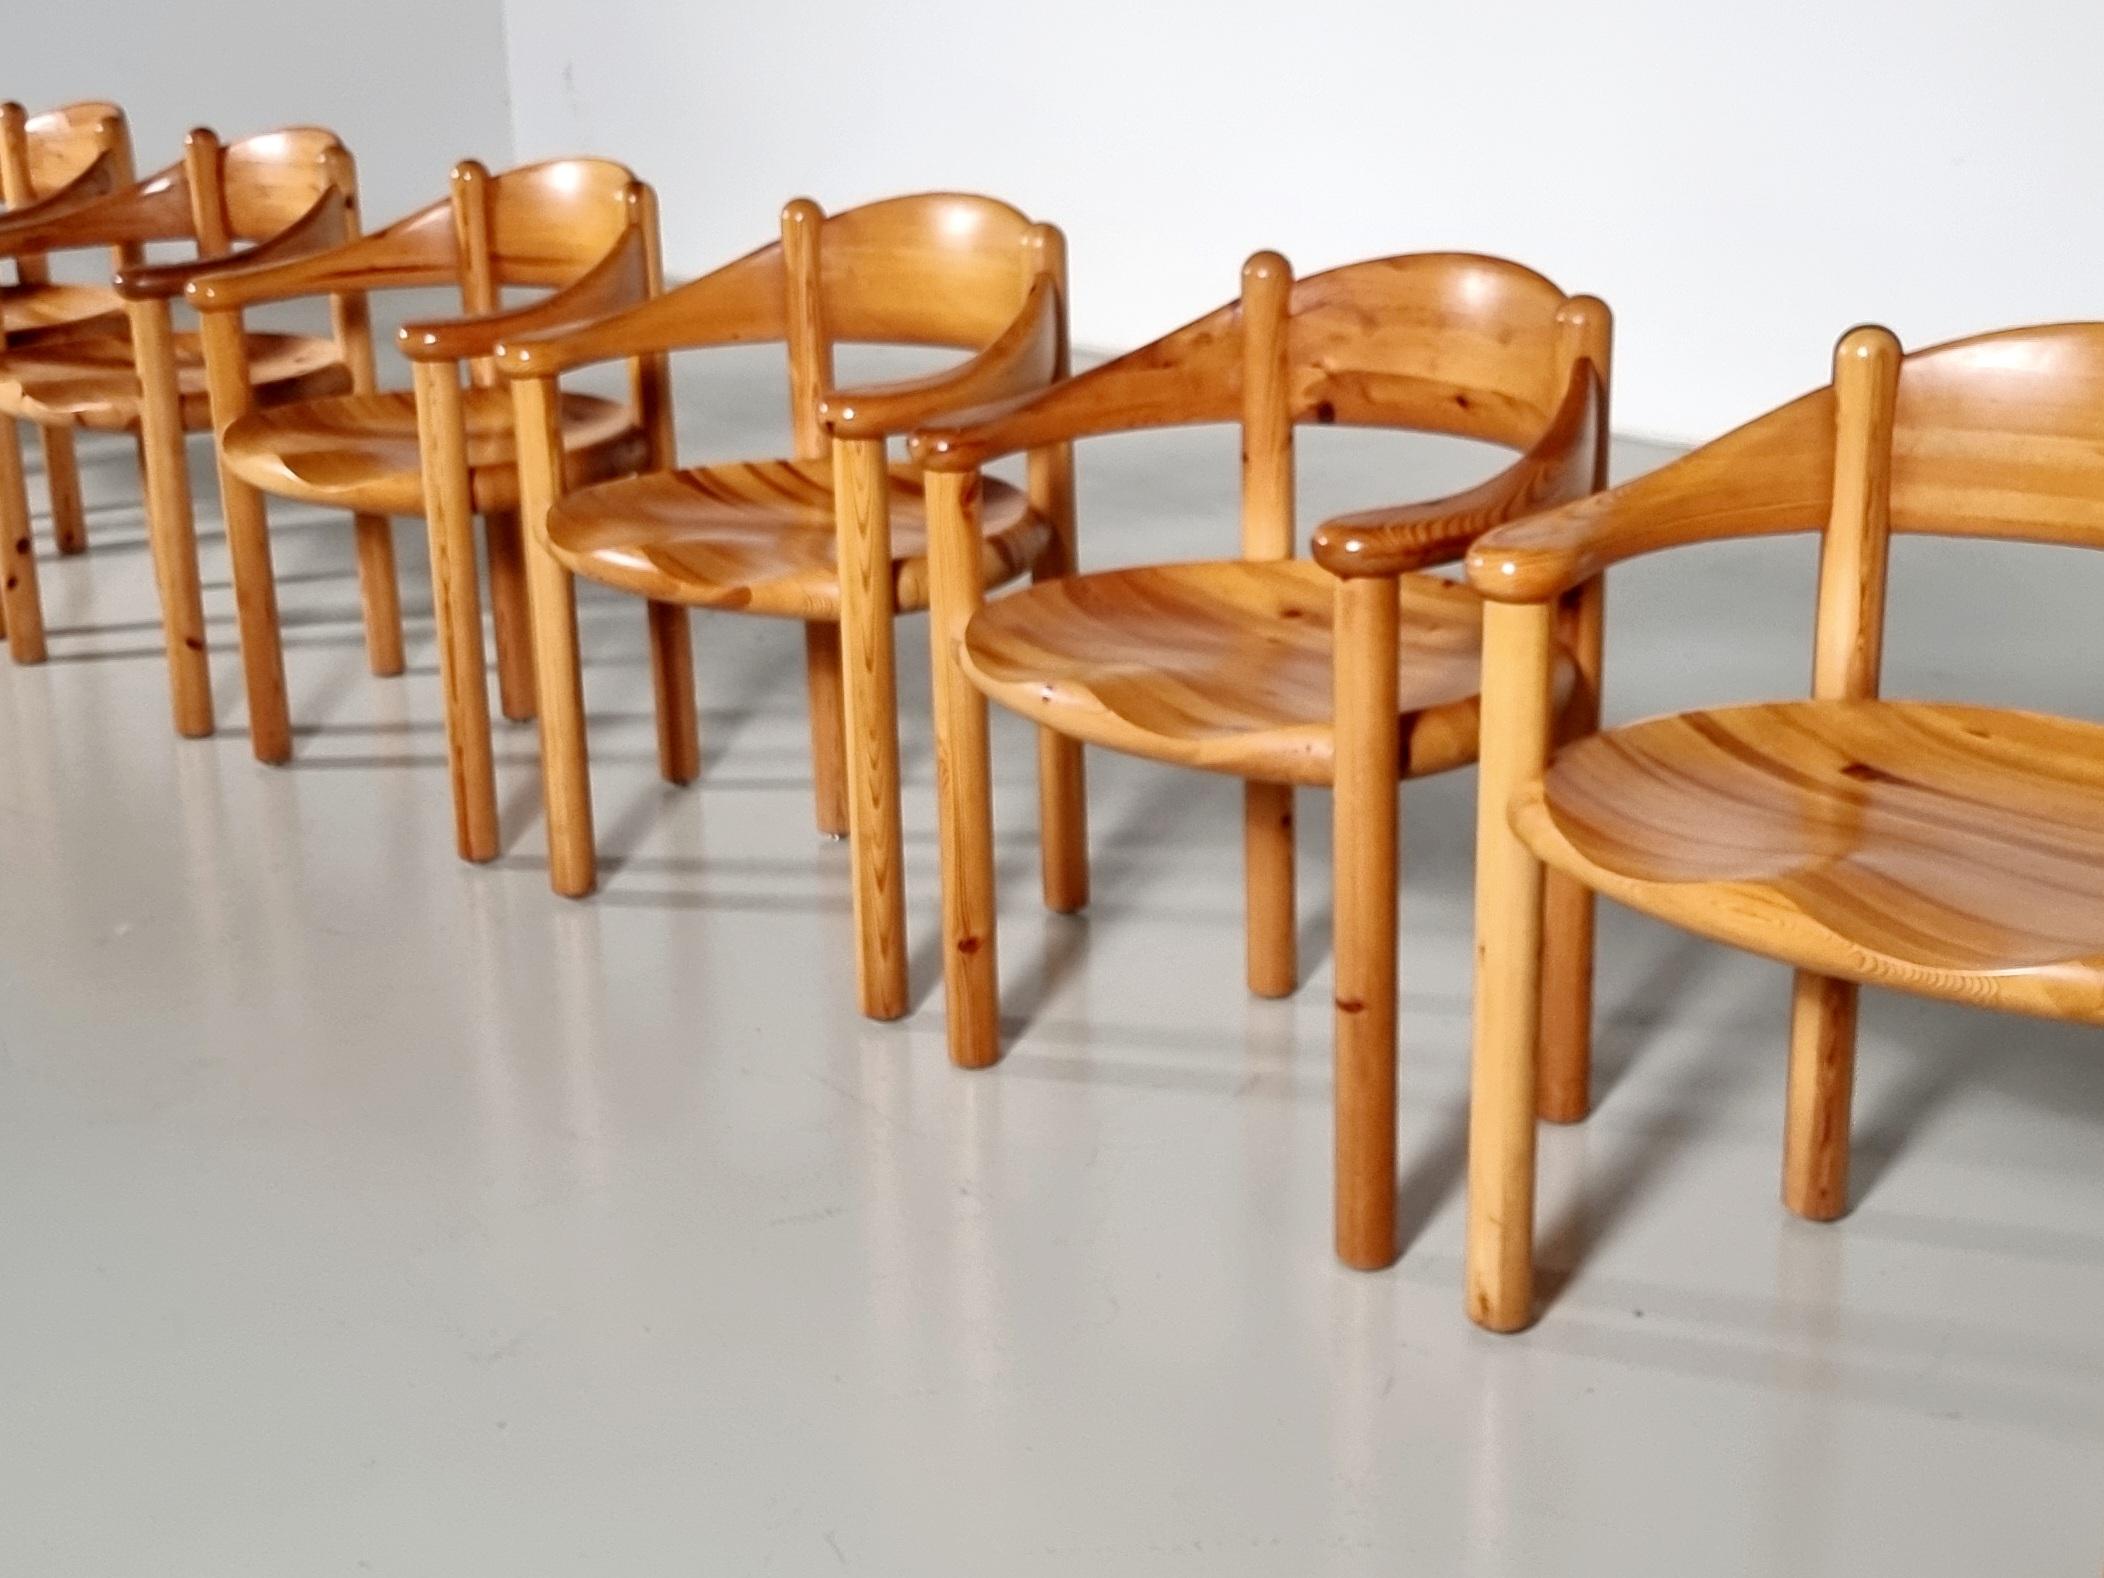 Pine Set of 8 pine wood carver chairs by Rainer Daumiller, 1960s For Sale